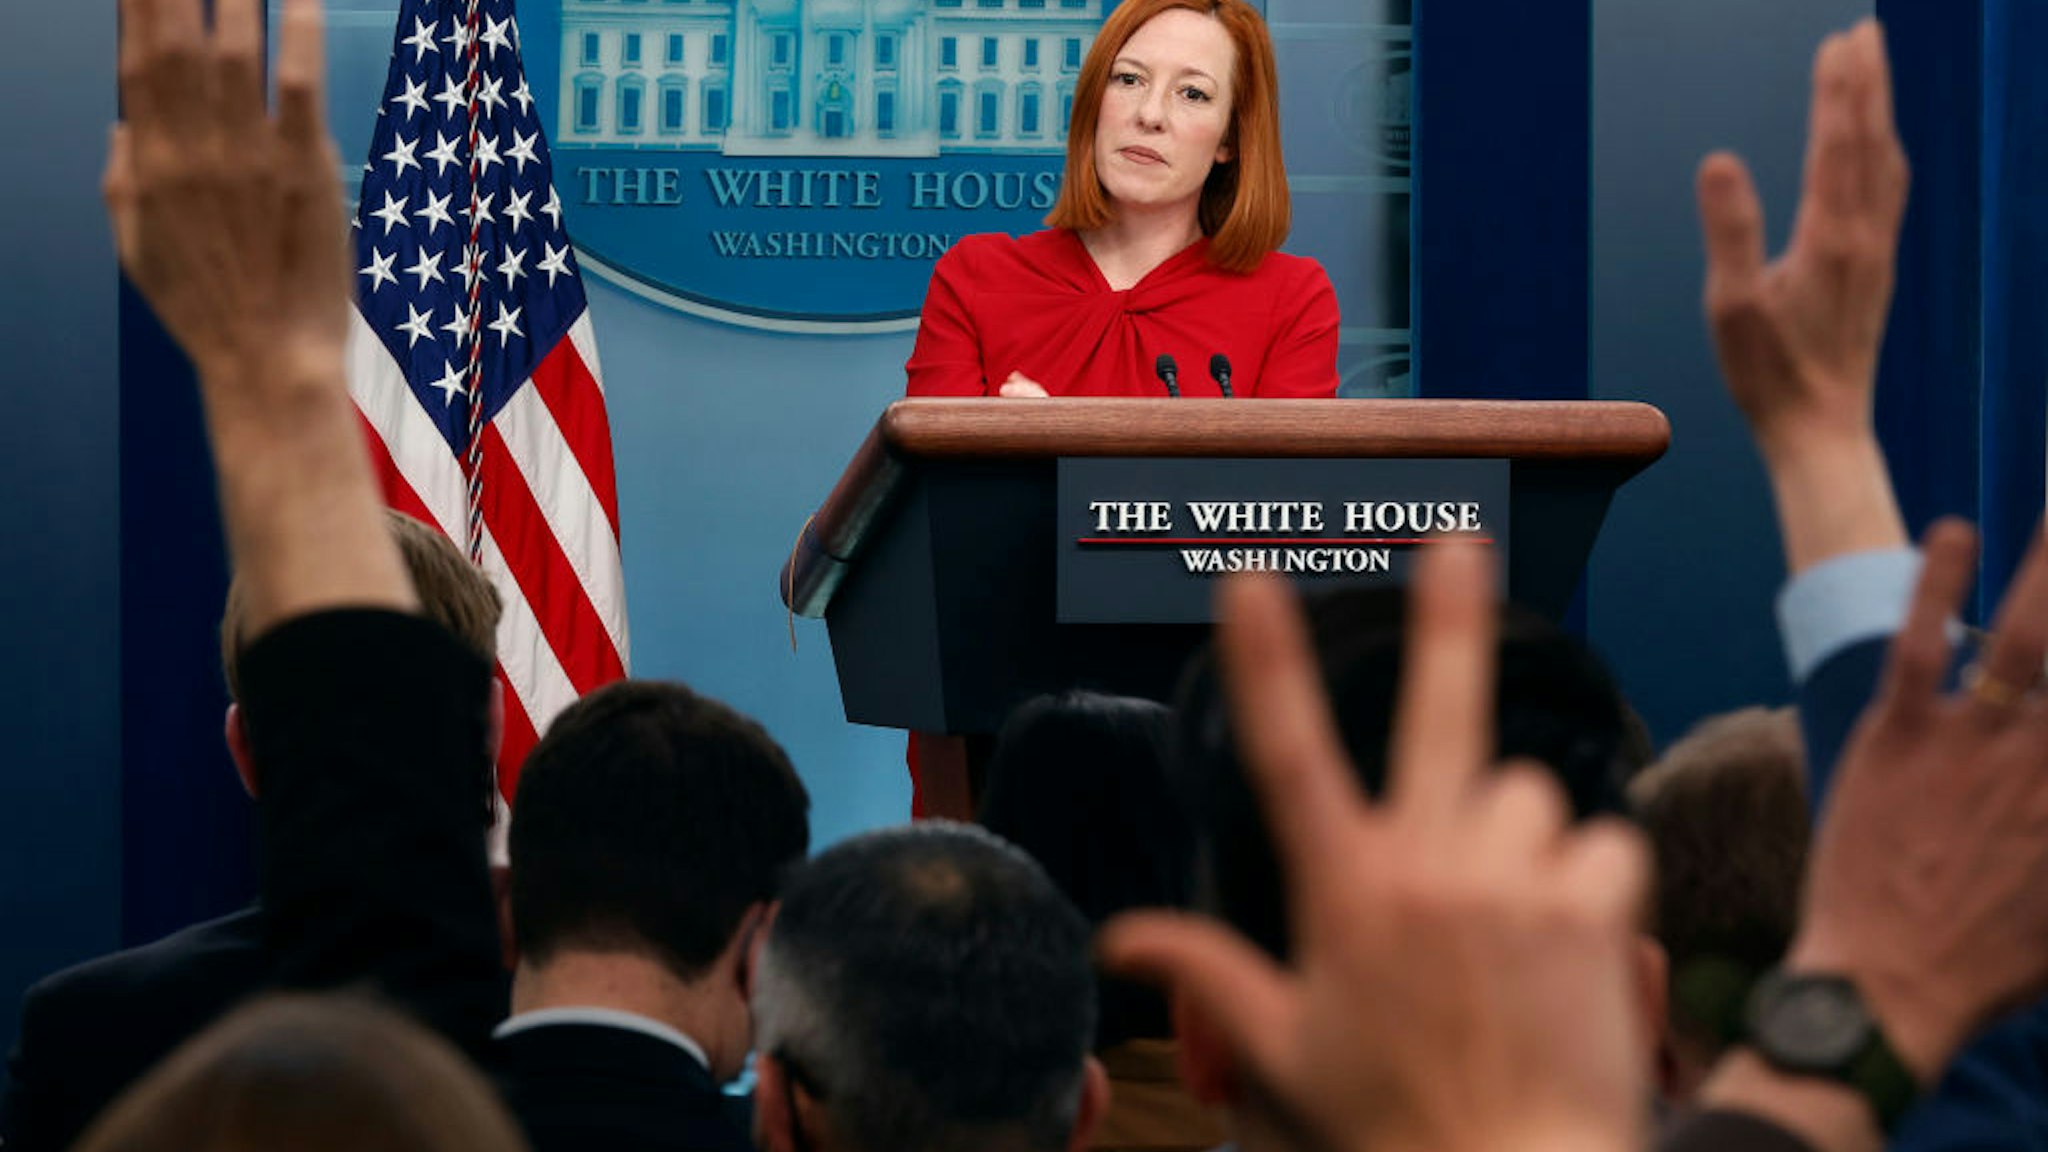 WASHINGTON, DC - APRIL 04: White House Press Secretary Jen Psaki talks to reporters during the daily news conference in the Brady Press Briefing Room at the White House on April 04, 2022 in Washington, DC. National Security Advisor Jake Sullivan answered reporters’ questions earlier in the briefing about the United States' ongoing support for the people of Ukraine in the face of the month-long Russian invasion. (Photo by Chip Somodevilla/Getty Images)